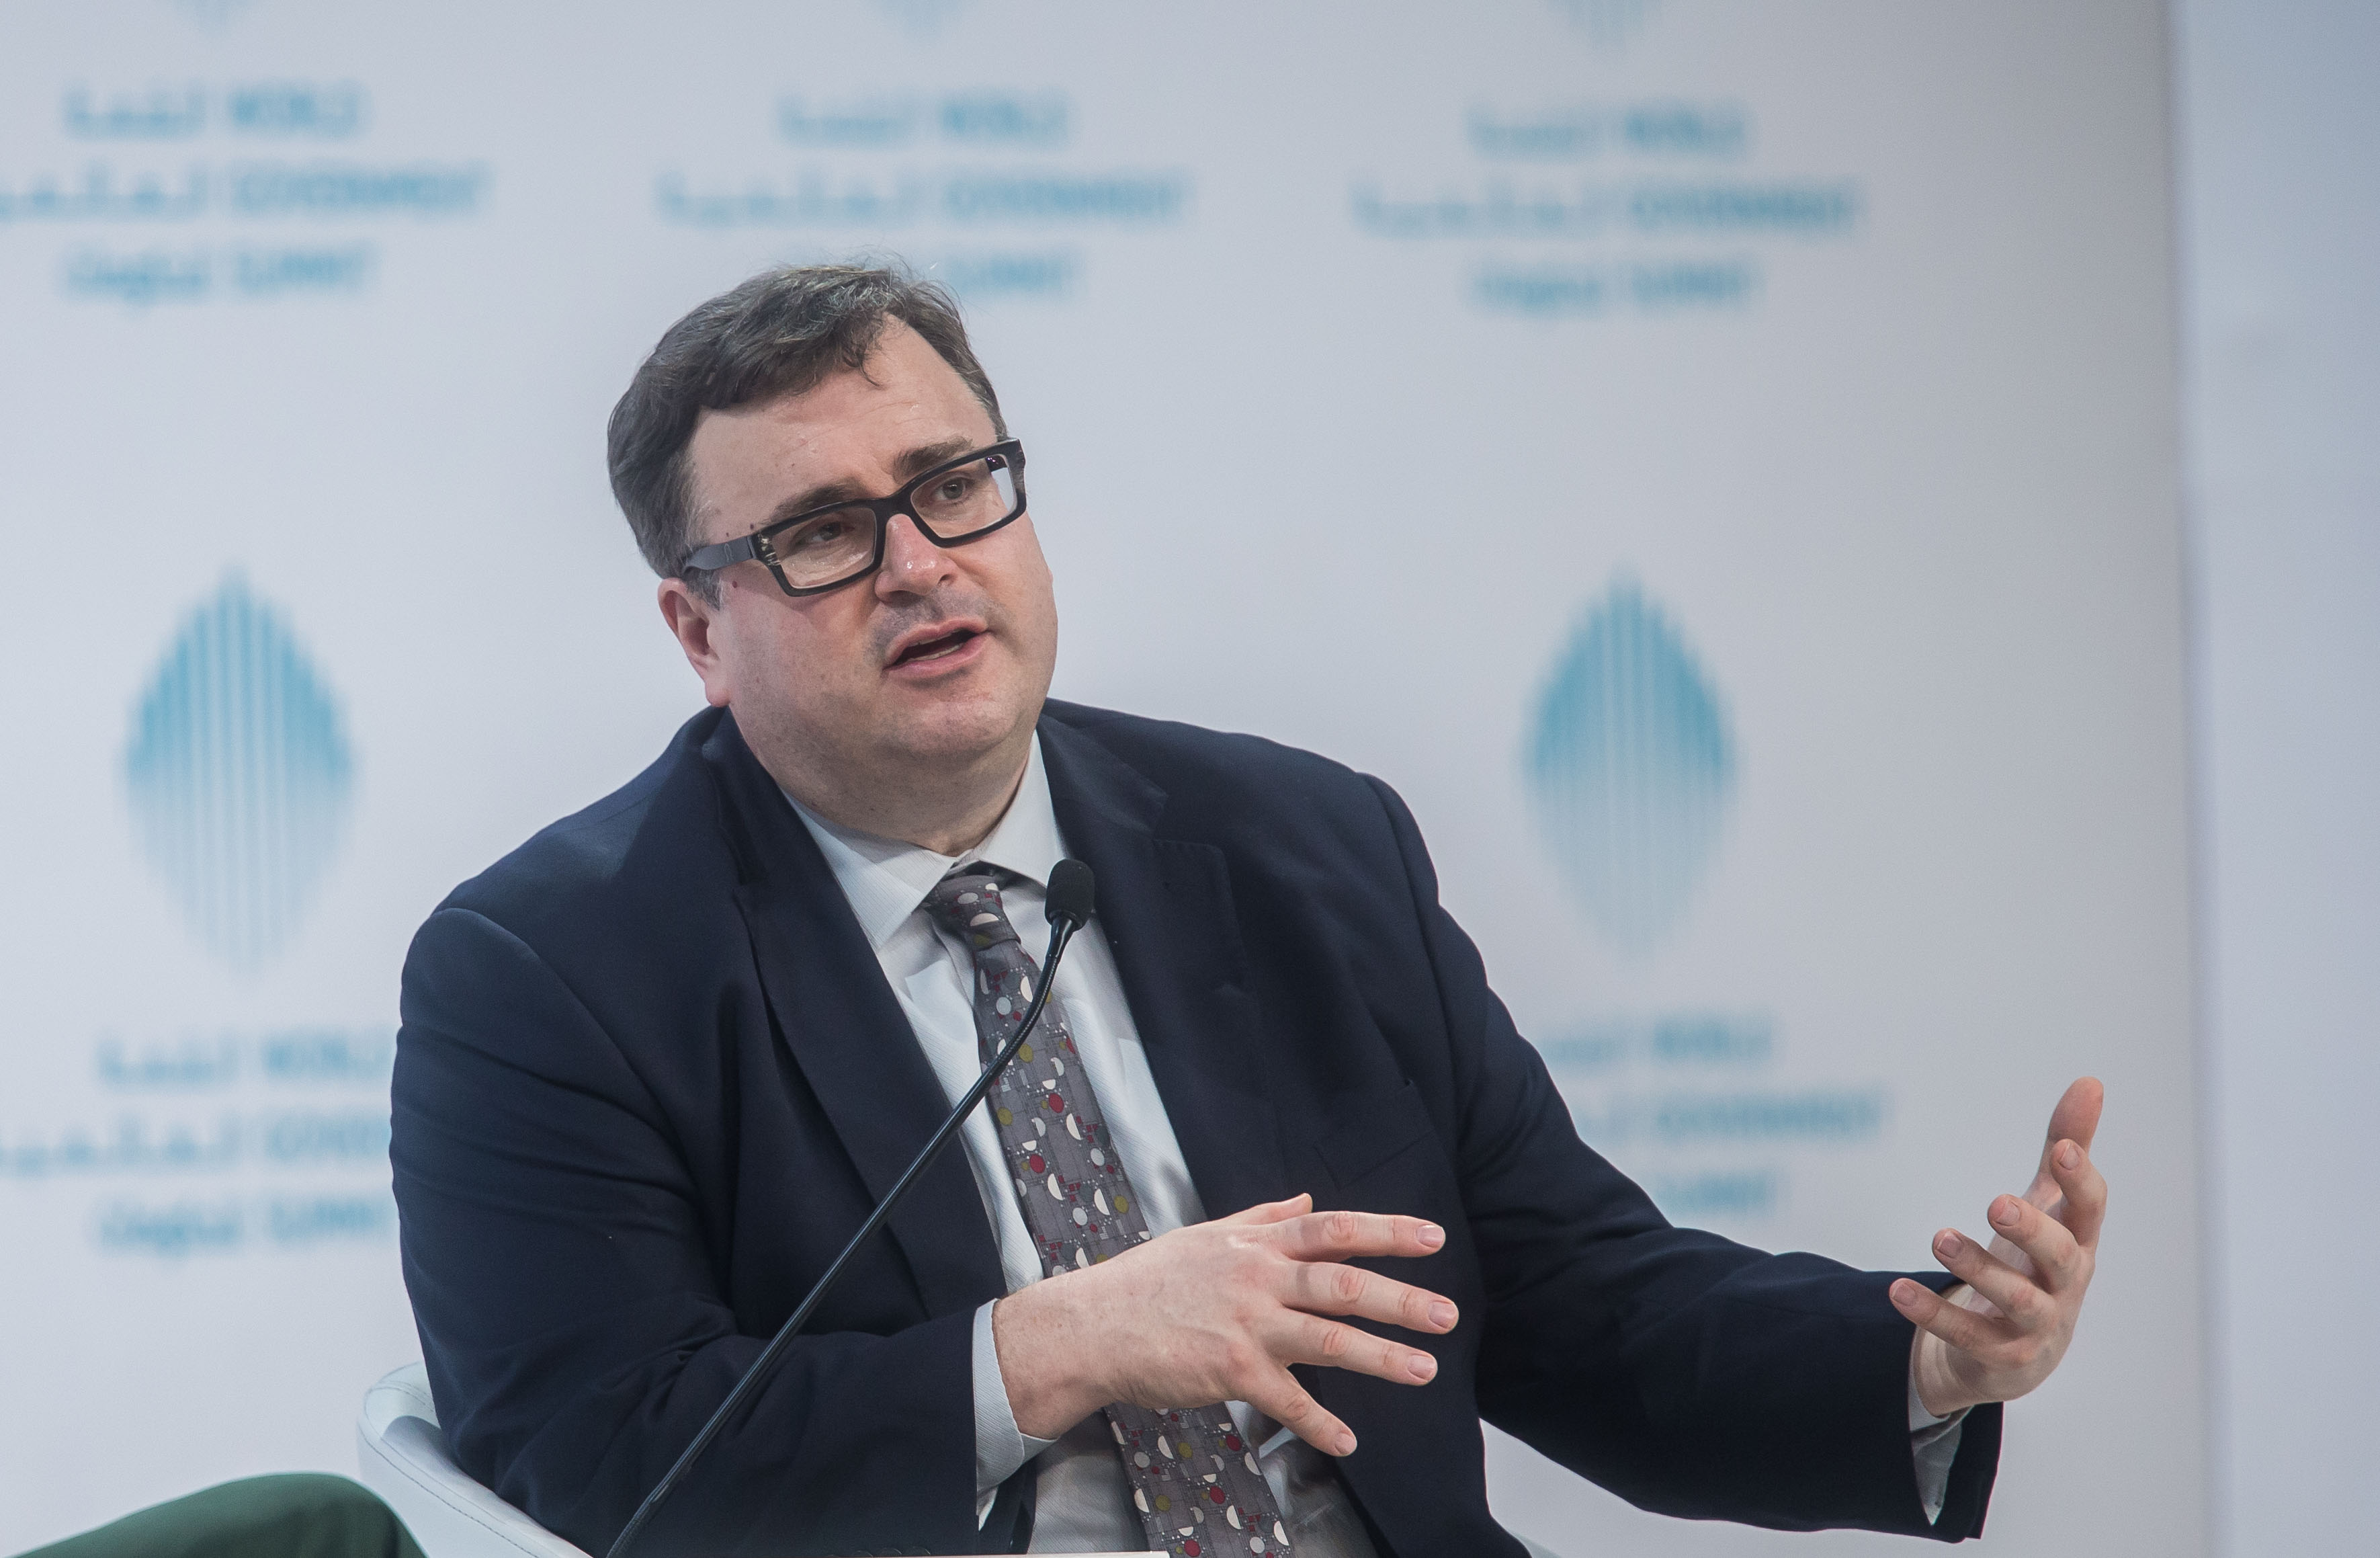 Governments need to take page out of venture capitalist playbook, says LinkedIn founder